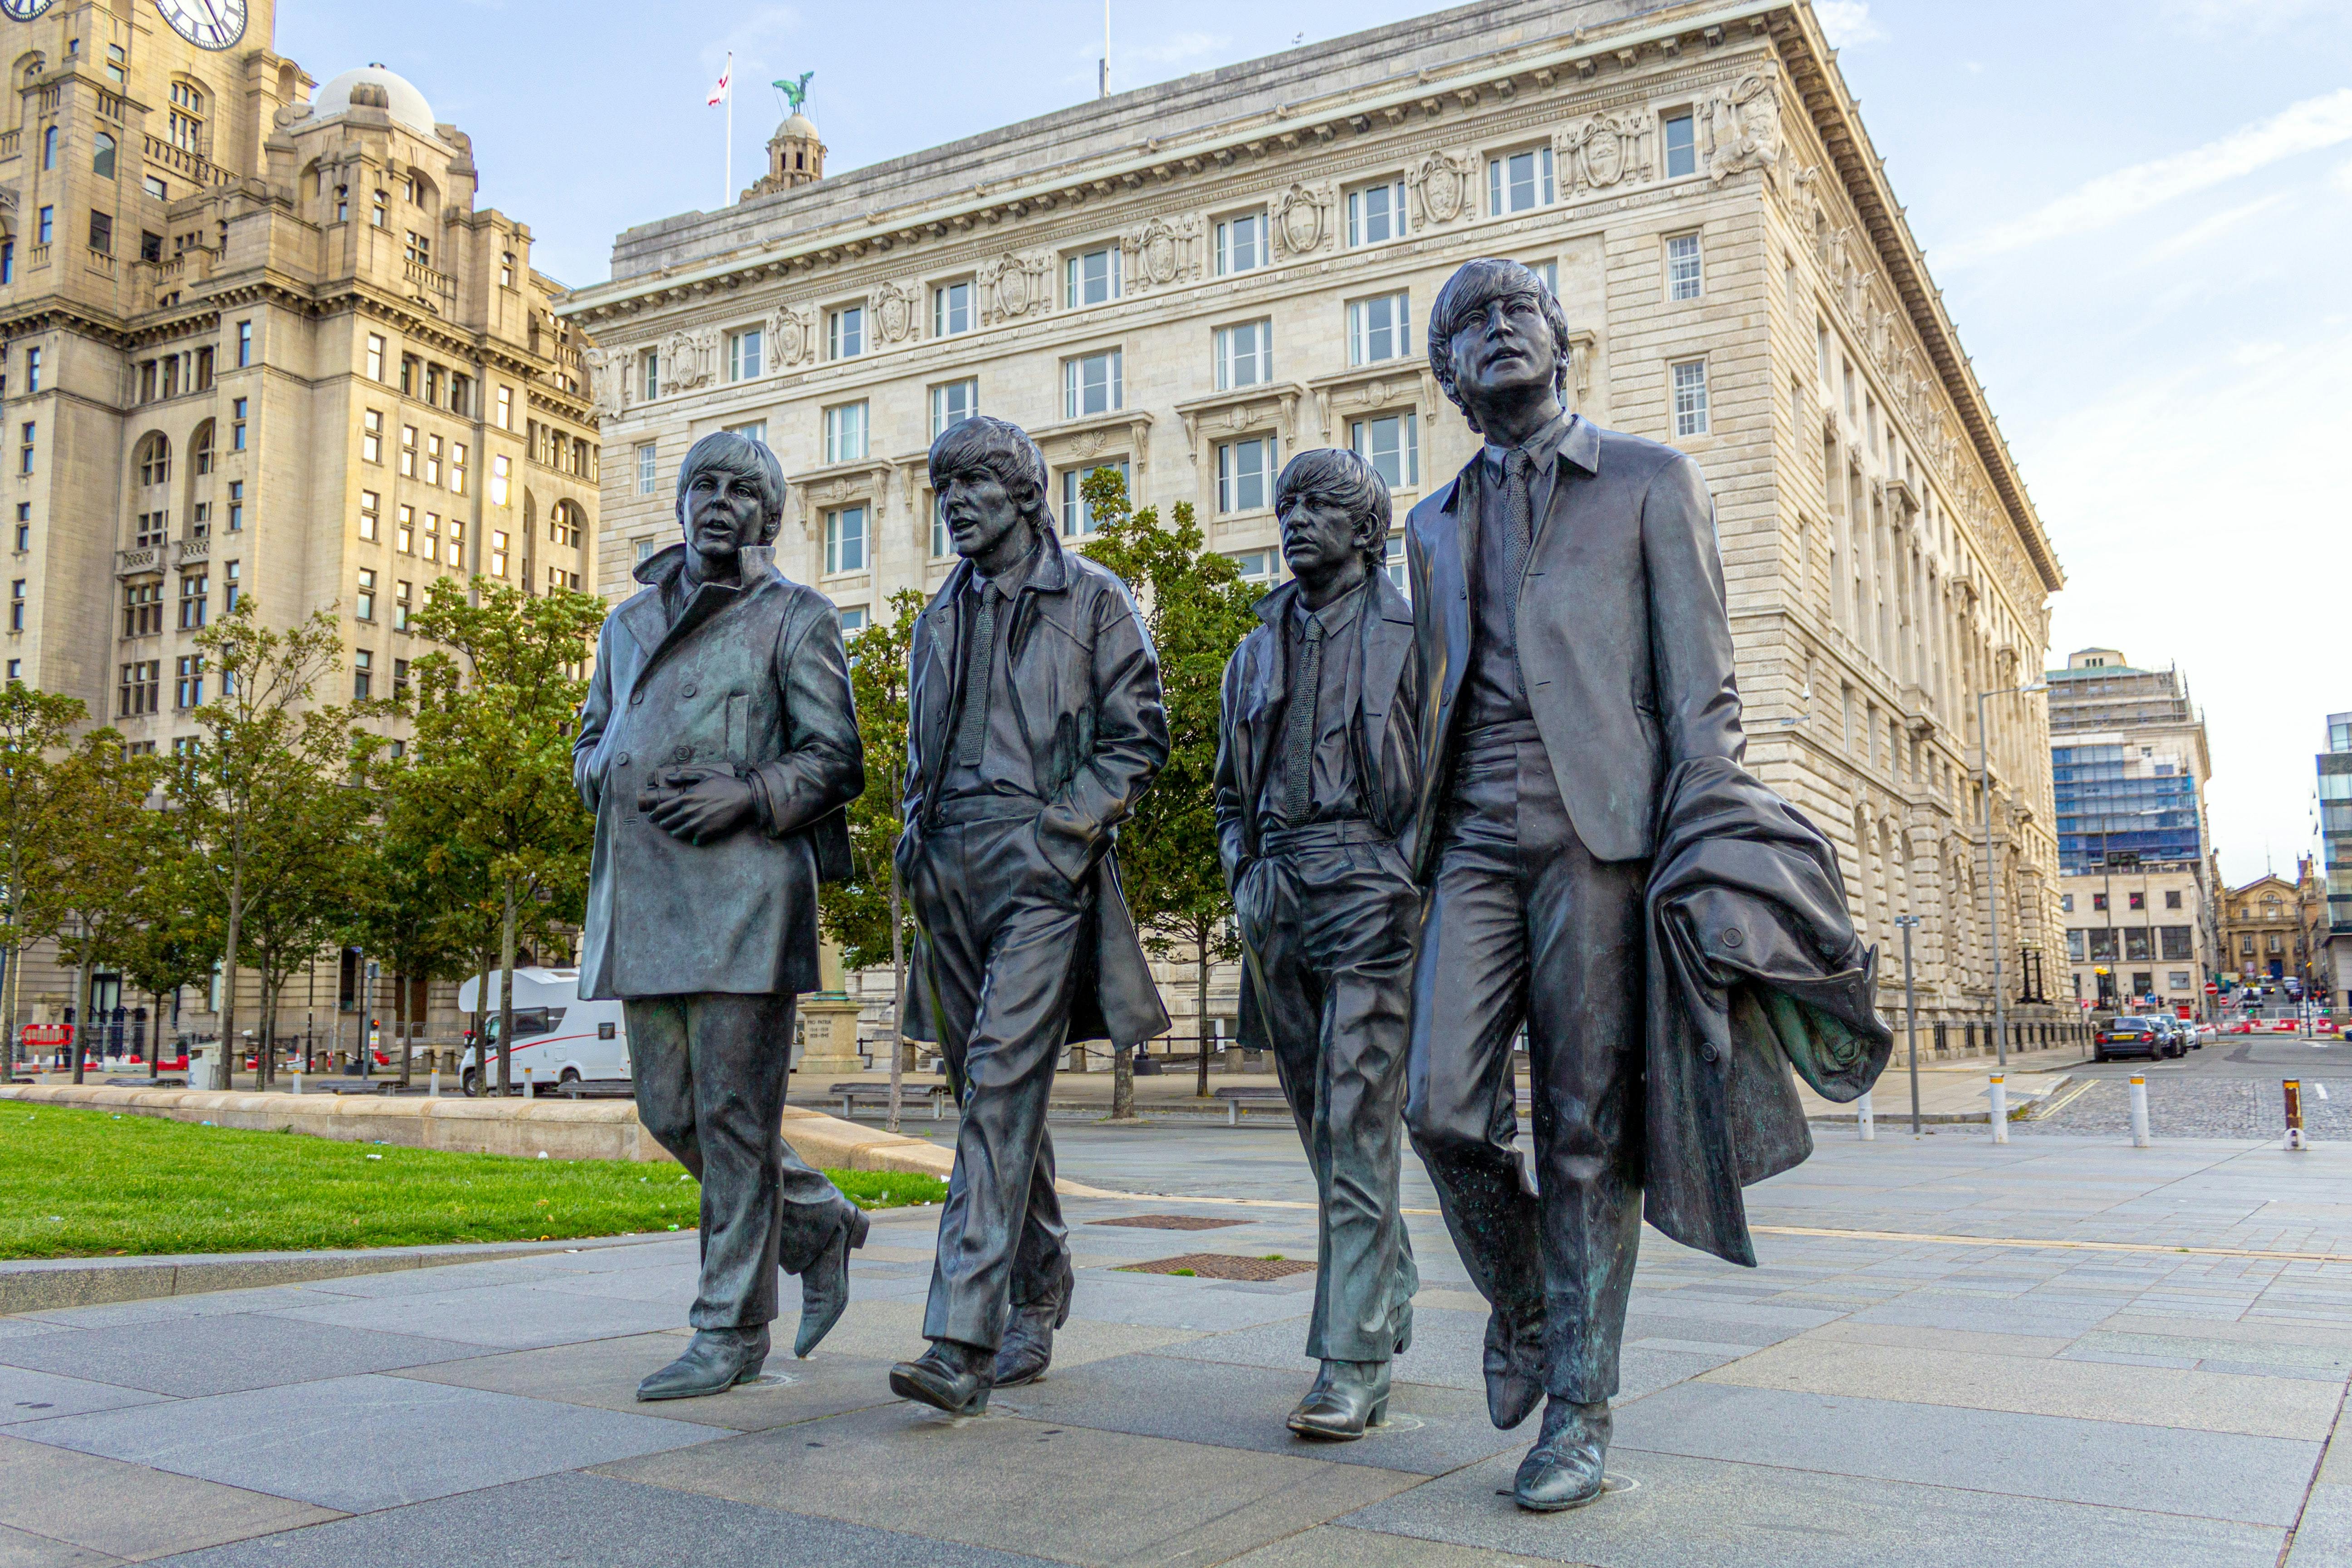 Beatles in Liverpool exploration game and tour